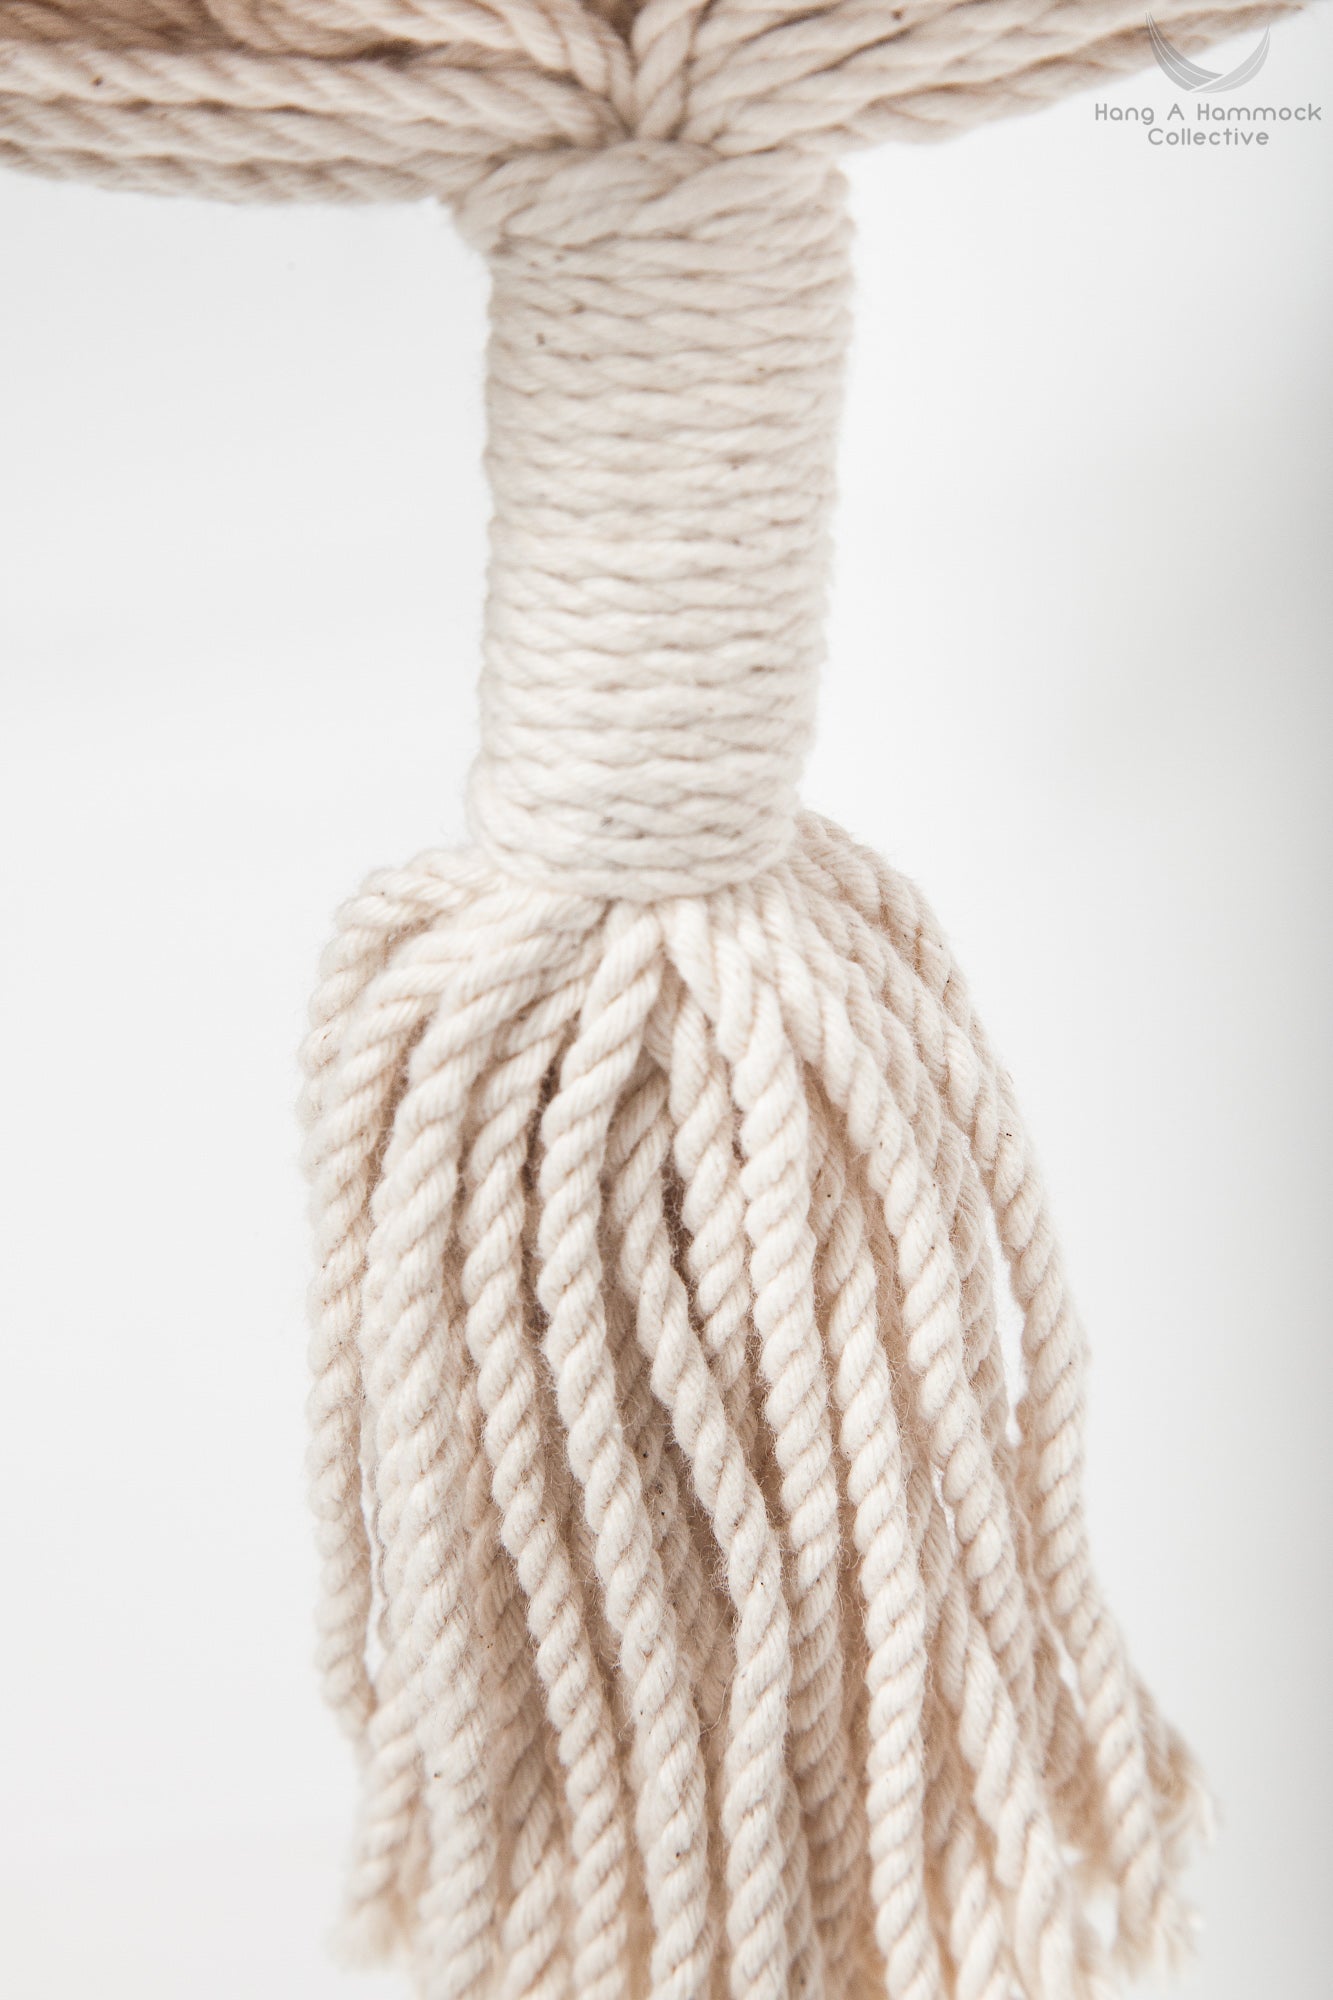 Braided Rope Swing - detail of the fringe - white backgorund